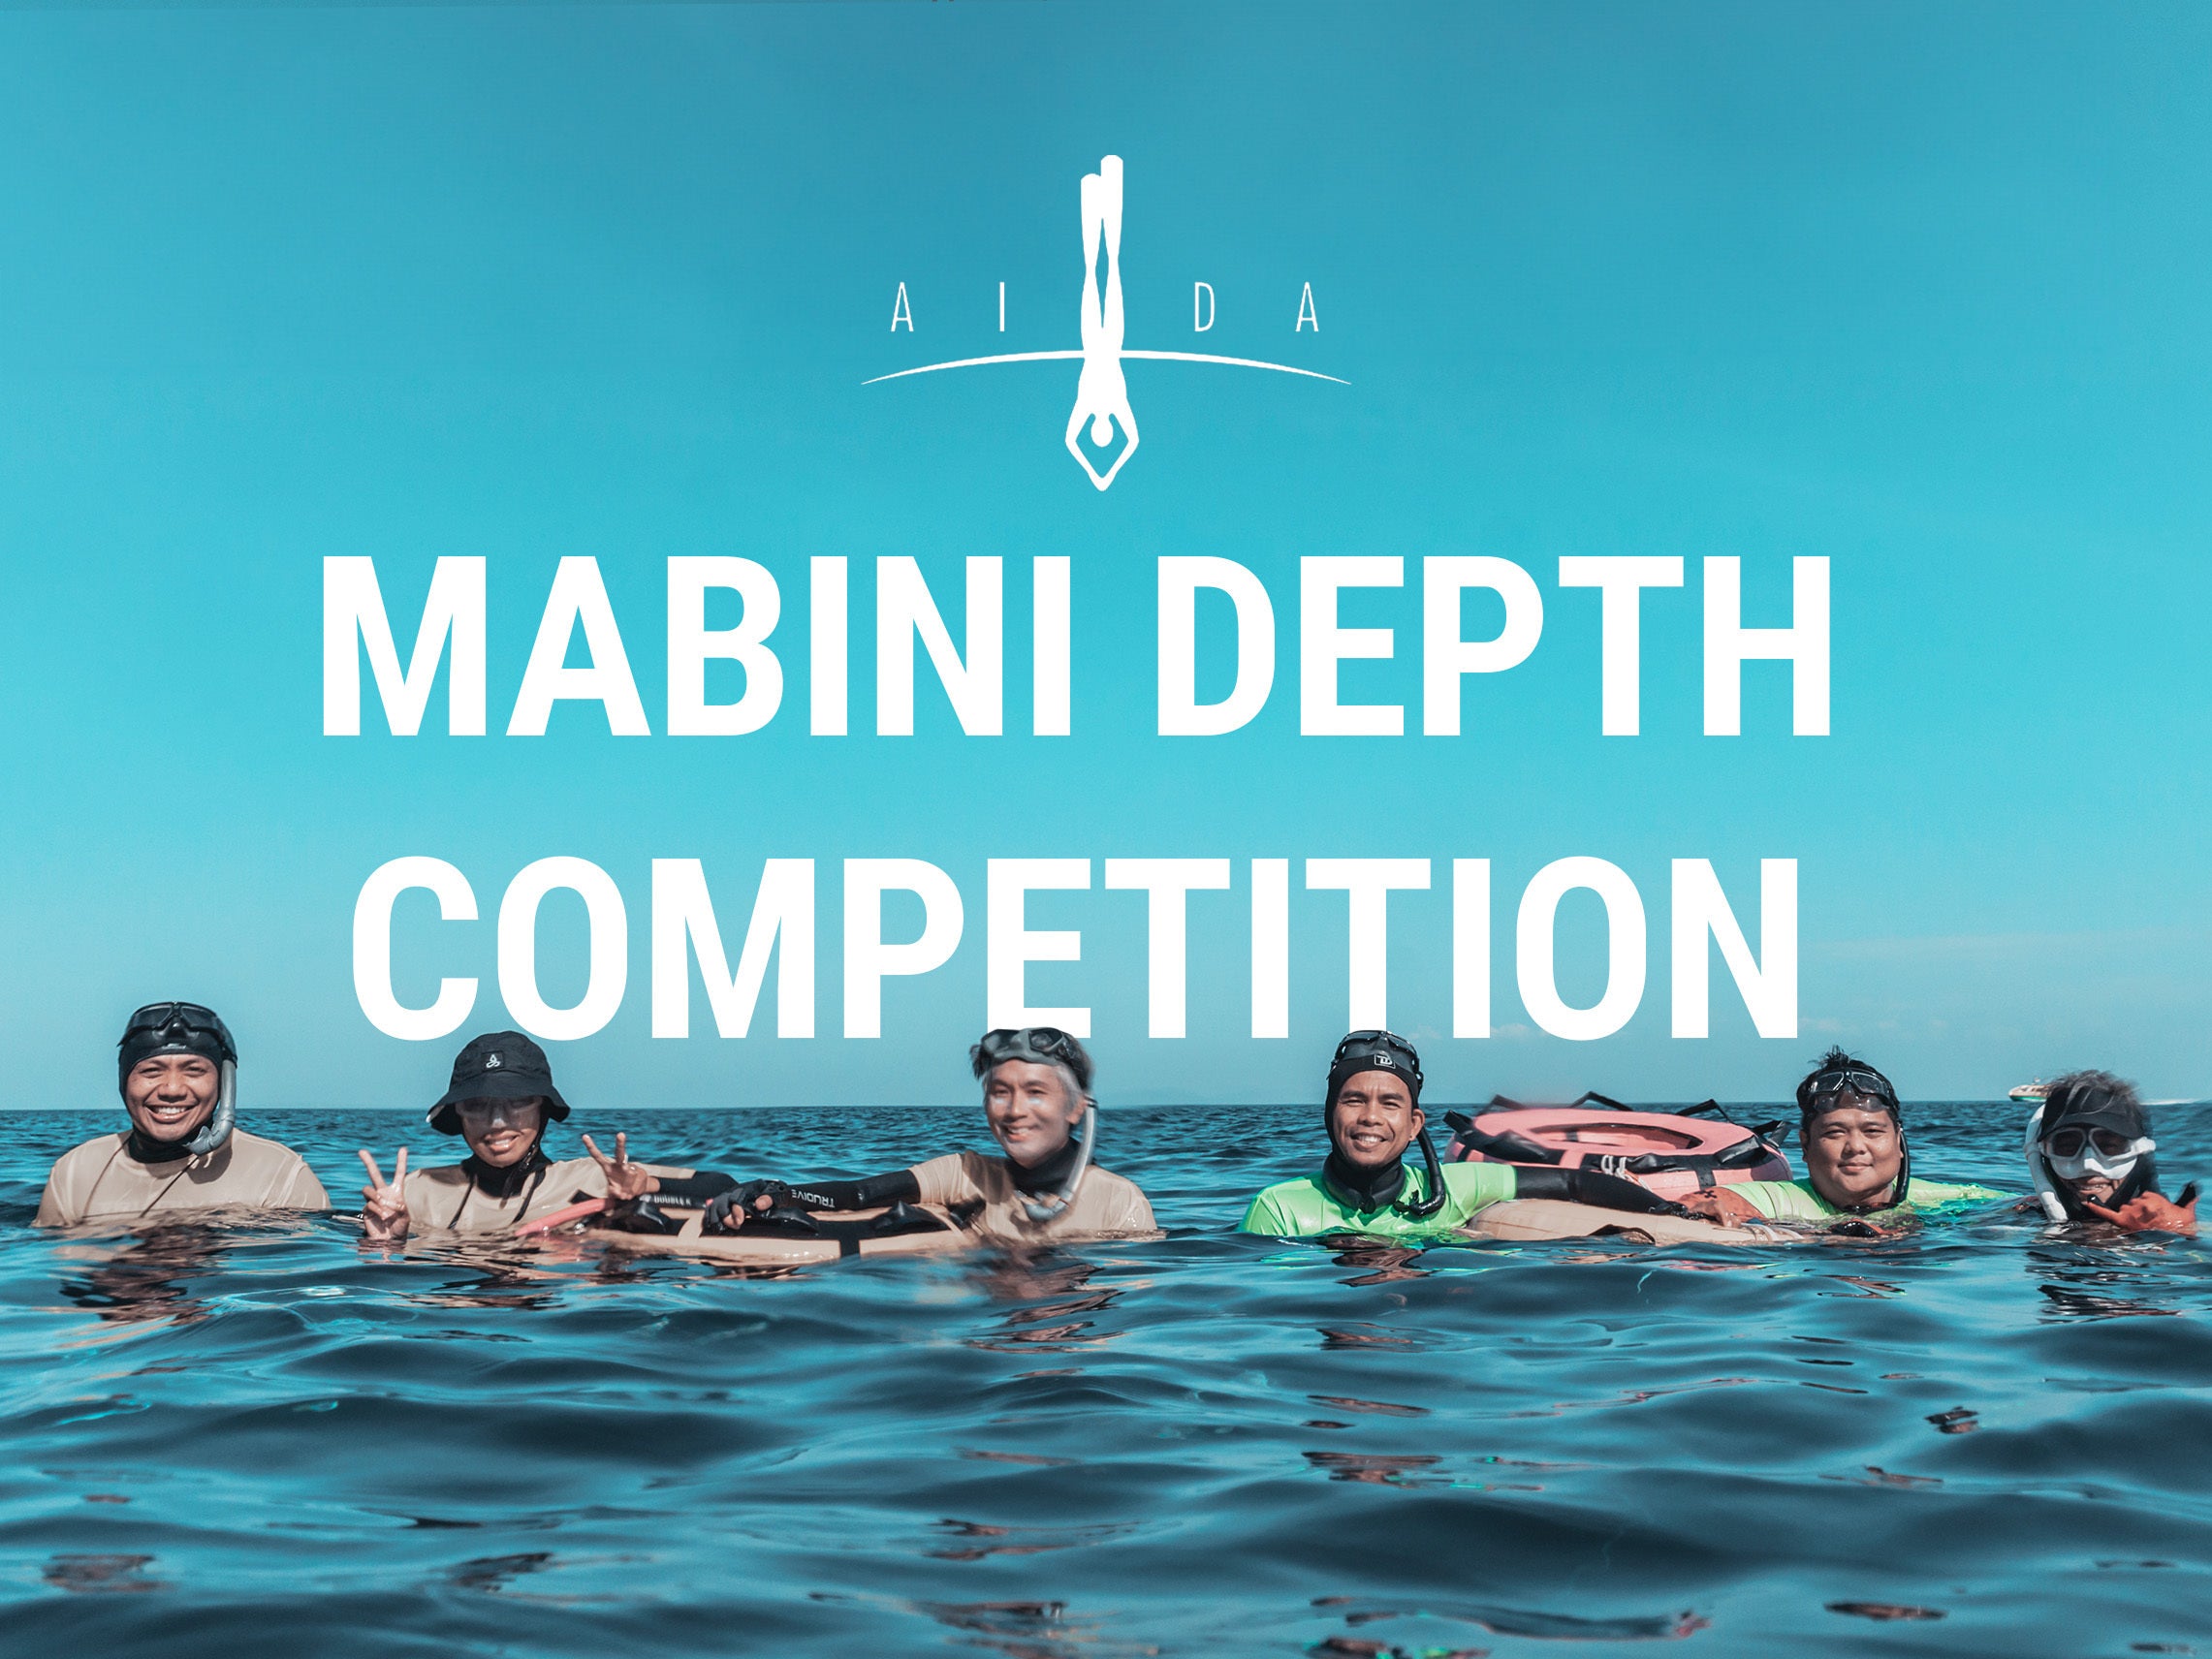 The AIDA Mabini Depth Competition Concludes